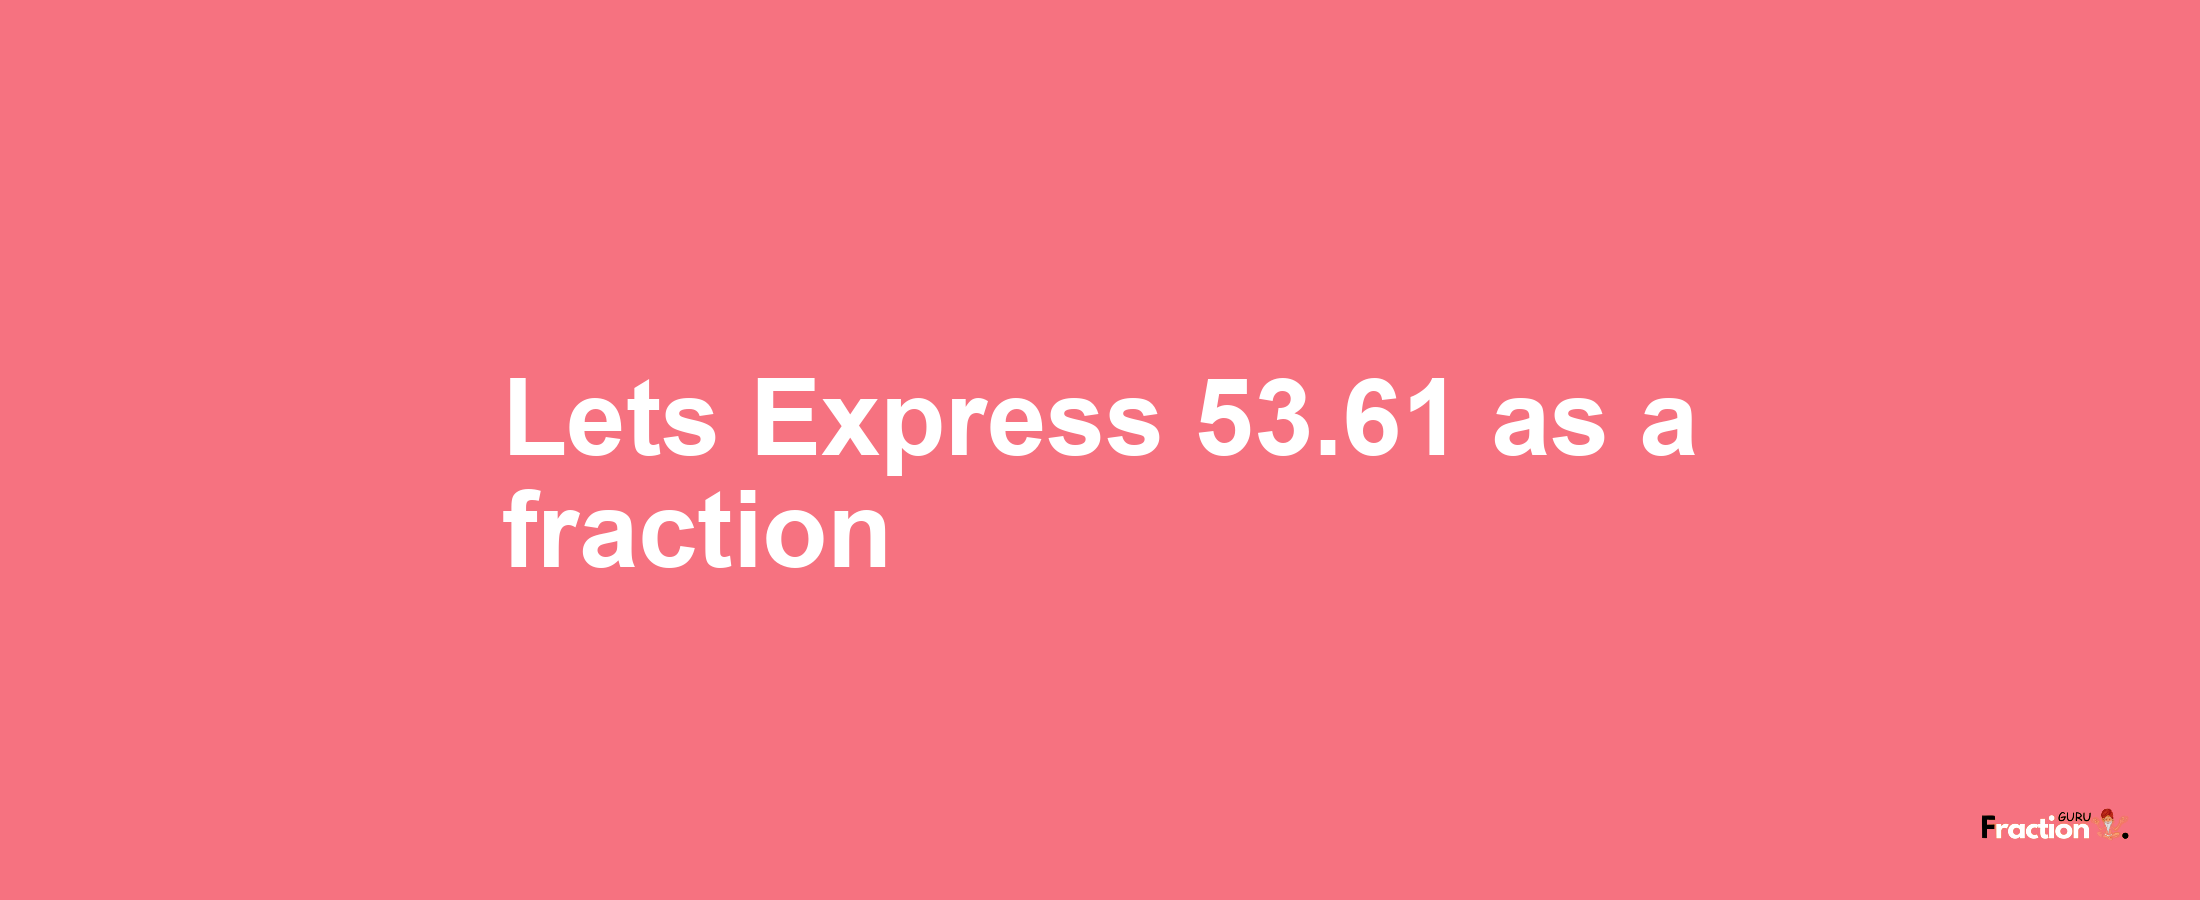 Lets Express 53.61 as afraction